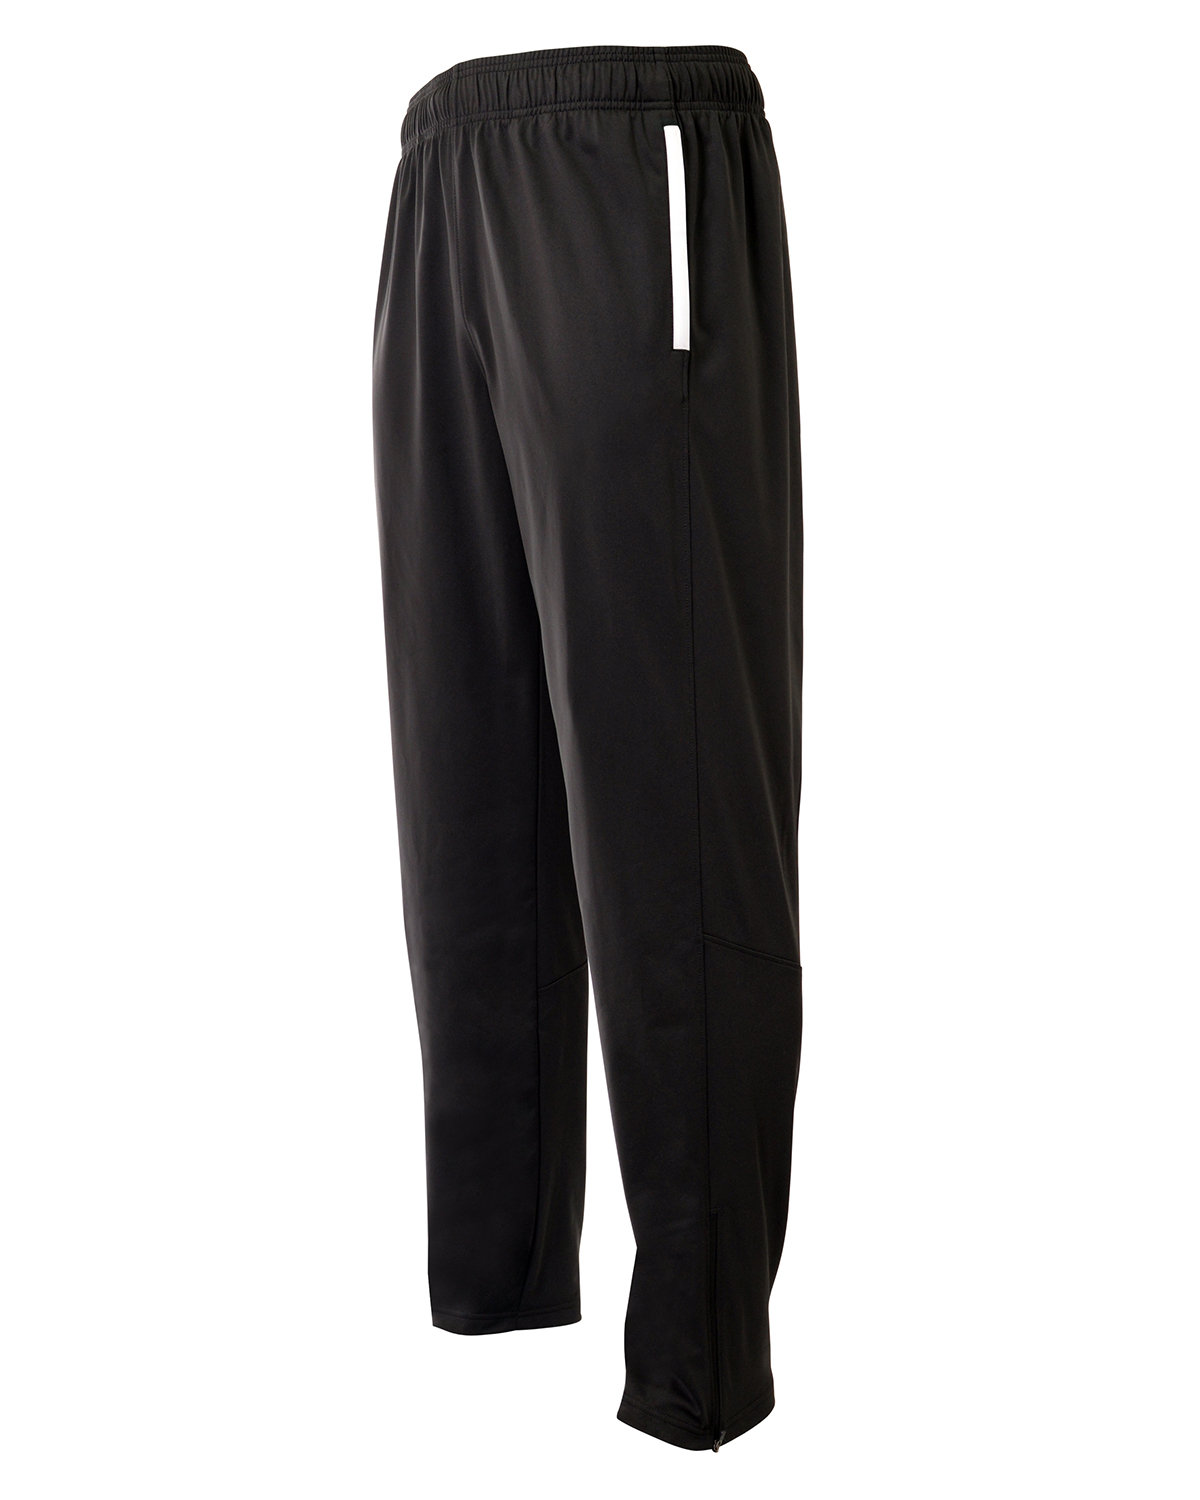 A4 Youth League Warm Up Pant | alphabroder